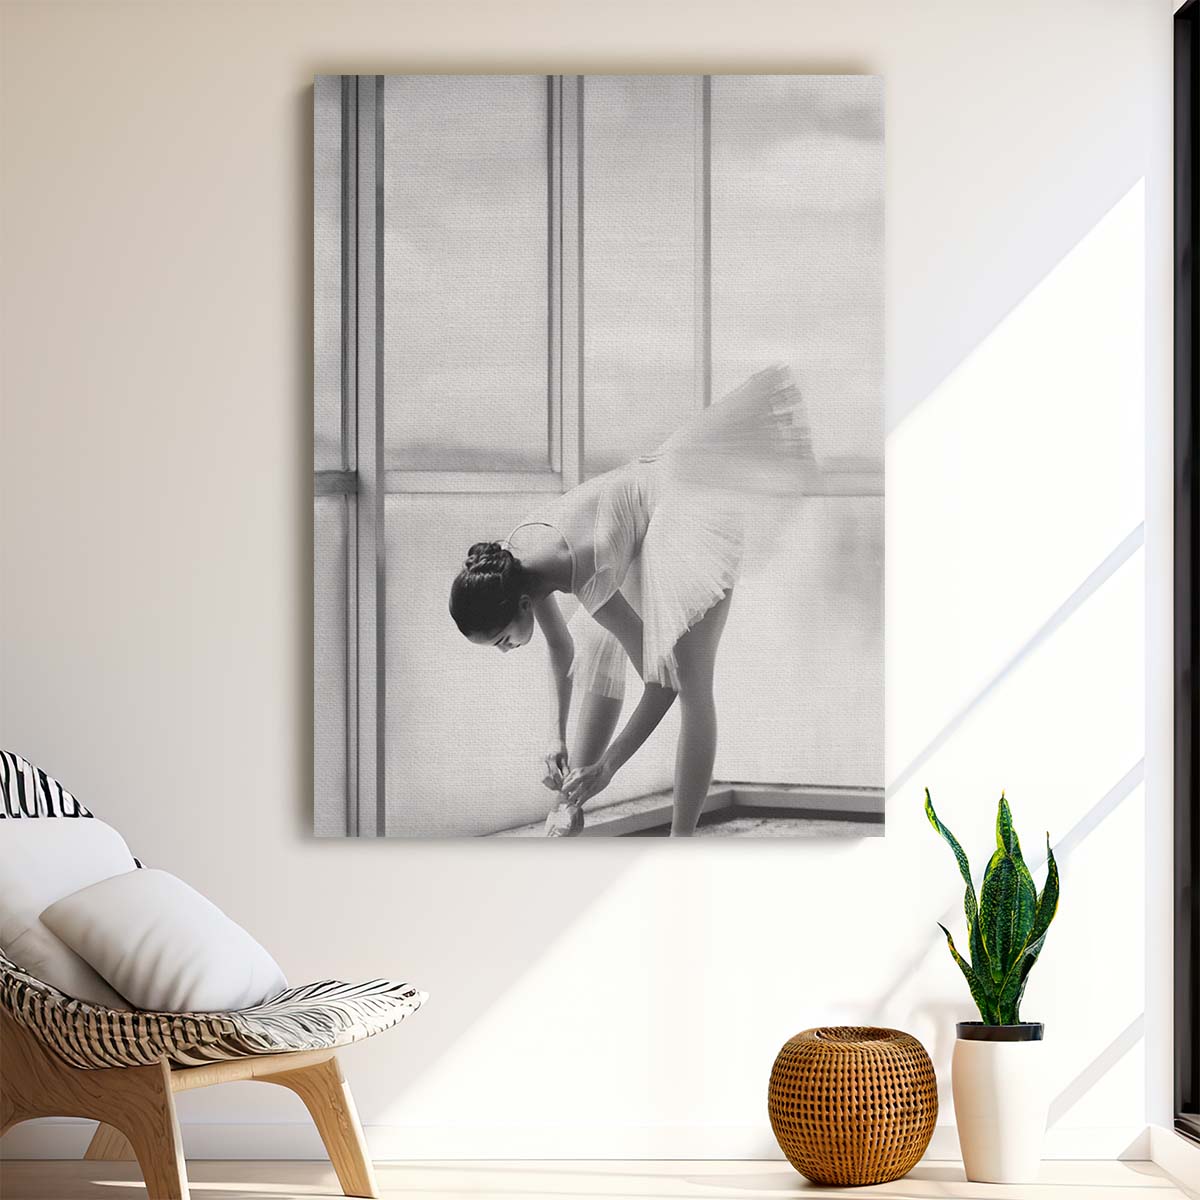 Graceful Ballerina Preparation Dance, Black and White Photography Art by Luxuriance Designs, made in USA